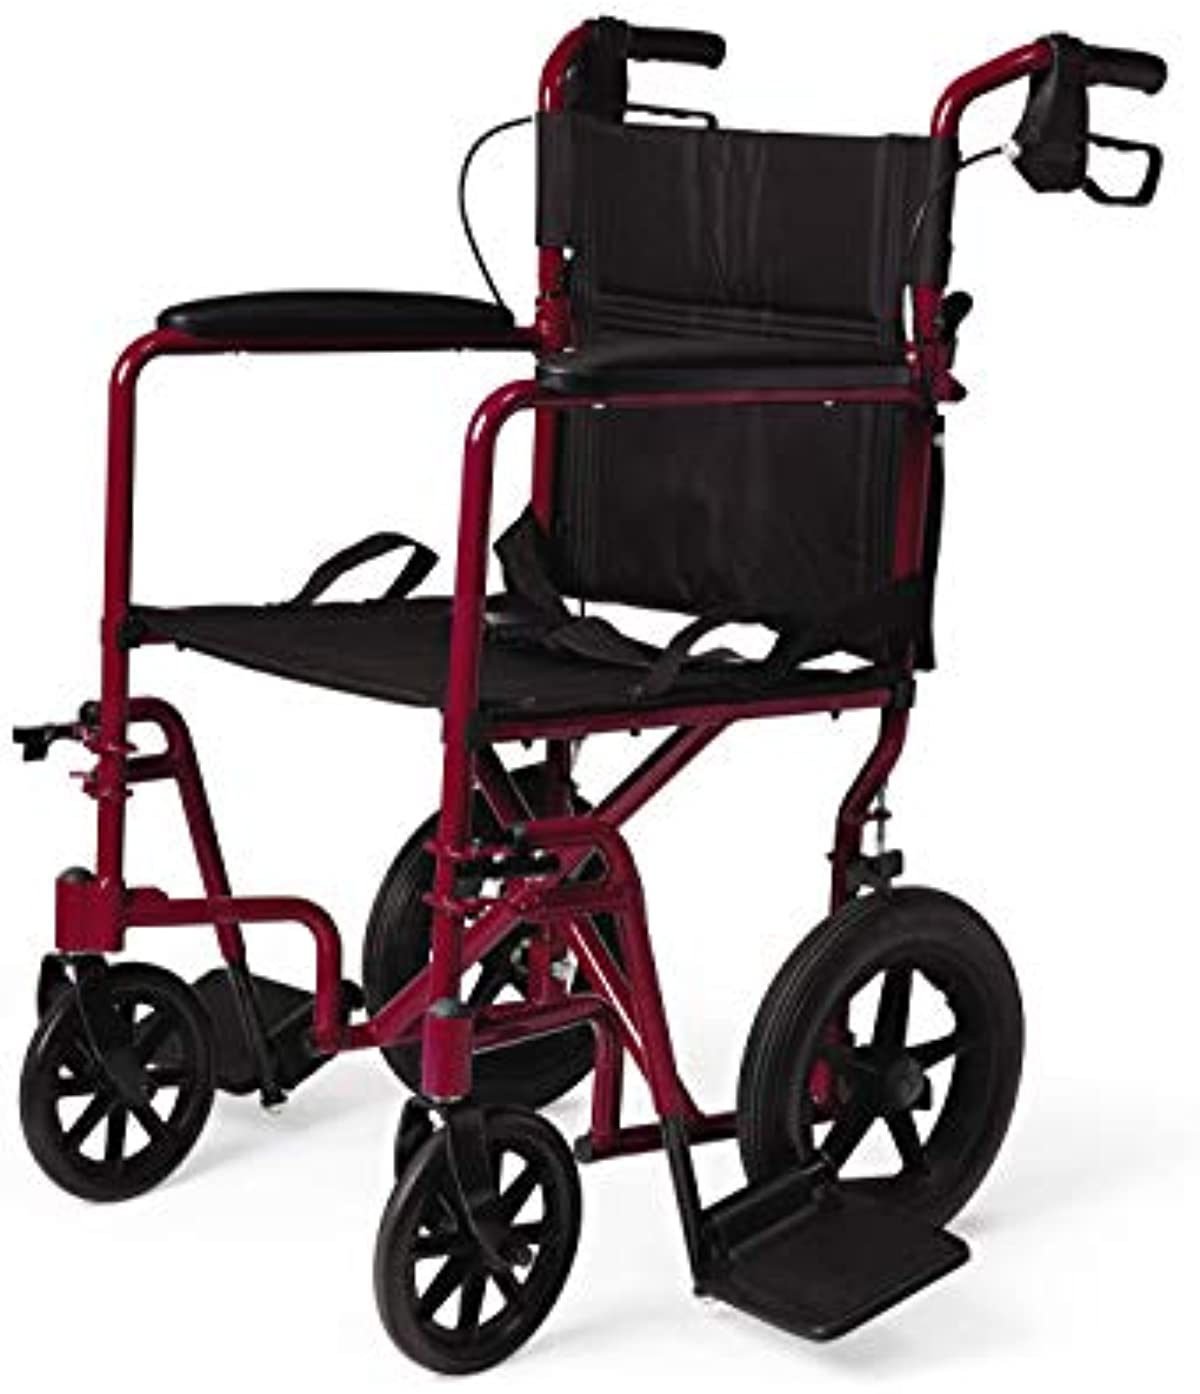 Medline Lightweight Transport Wheelchair with Handbrakes, Folding Transport Chair for Adults has 12 inch Wheels, Red